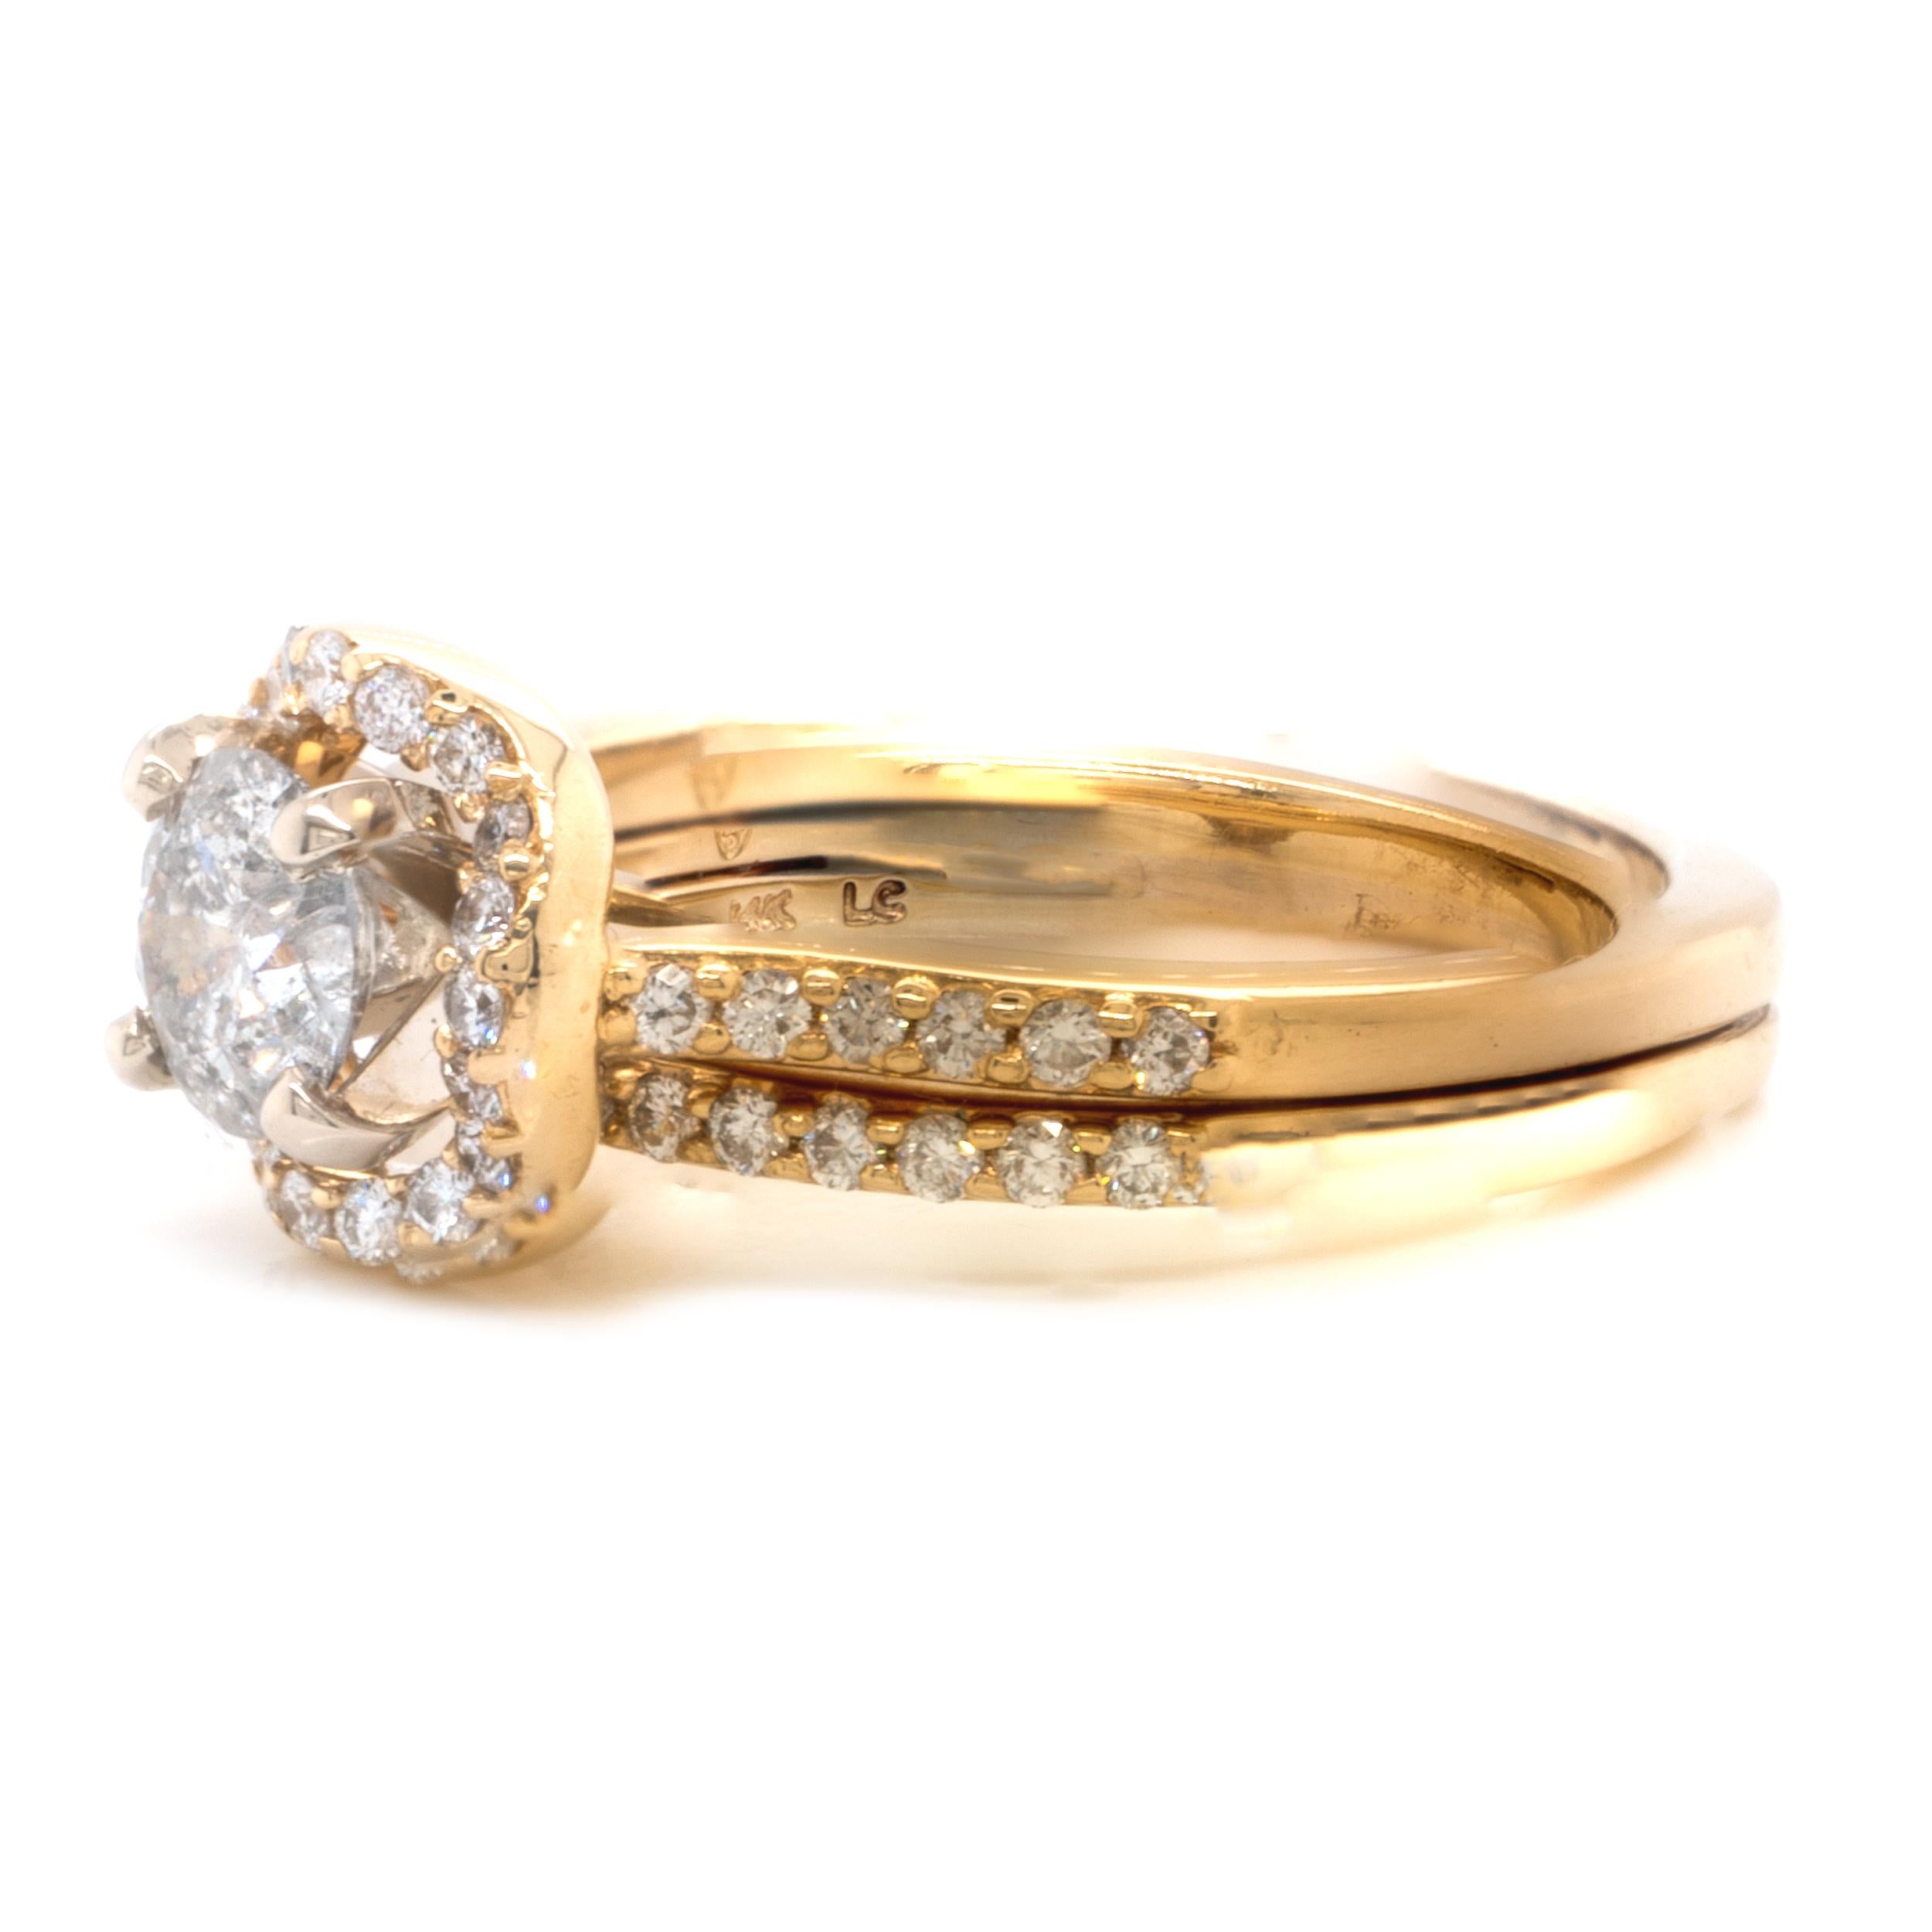 Designer: custom
Material: 14K yellow gold
Diamond: 1 round brilliant cut = 0.50ct 
Color: Galaxy
Clarity: Galaxy
Diamond: 48 round cut = .48cttw
Color: H
Clarity: SI2
Ring Size: 6.5 (please allow up to 2 additional business days for sizing